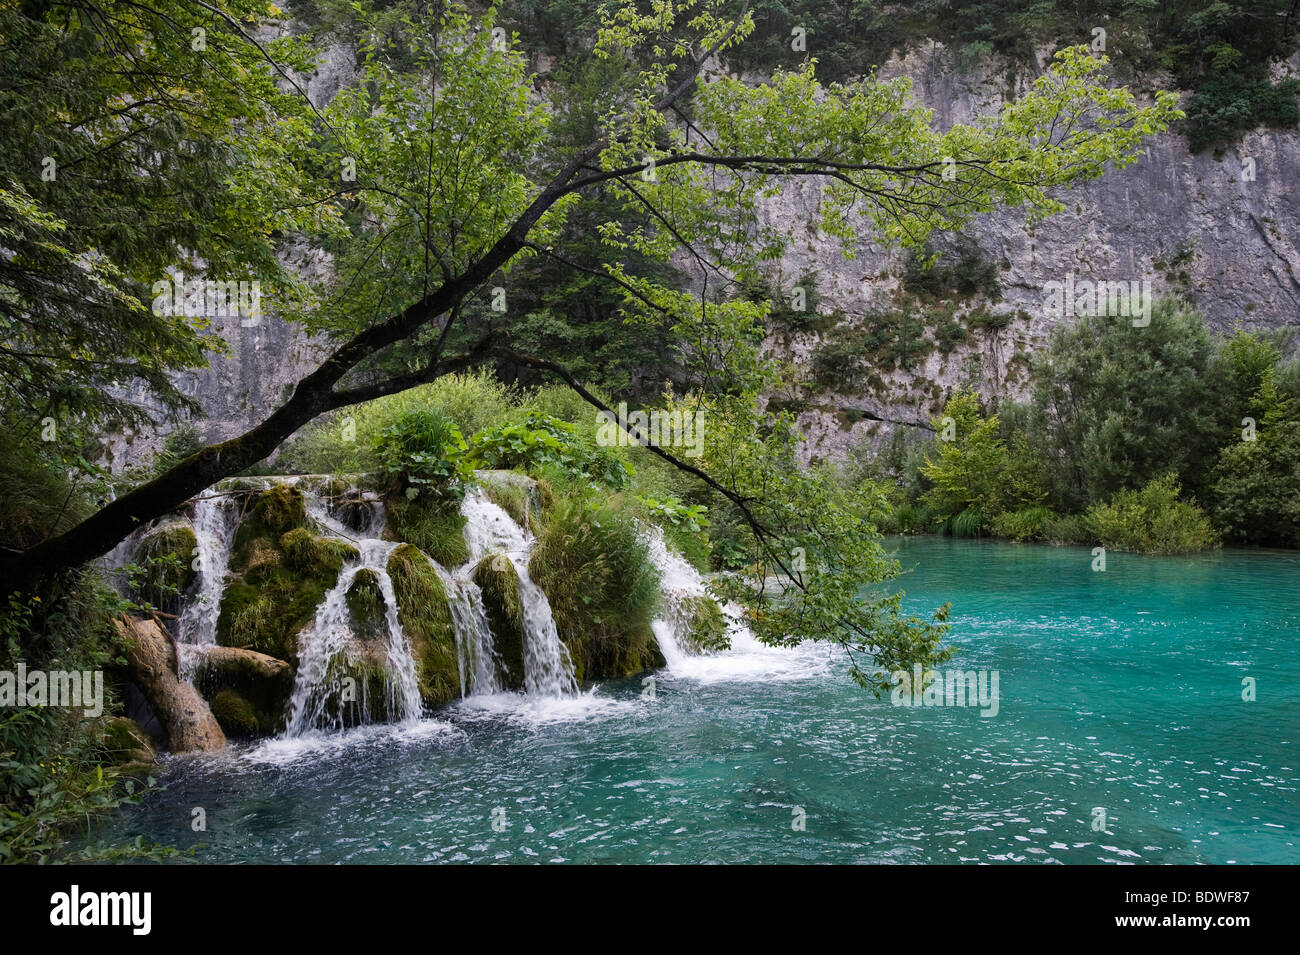 Small waterfall in the cascade landscape of the Plitvice Lakes, Plitvice Lakes National Park, Croatia, Europe Stock Photo